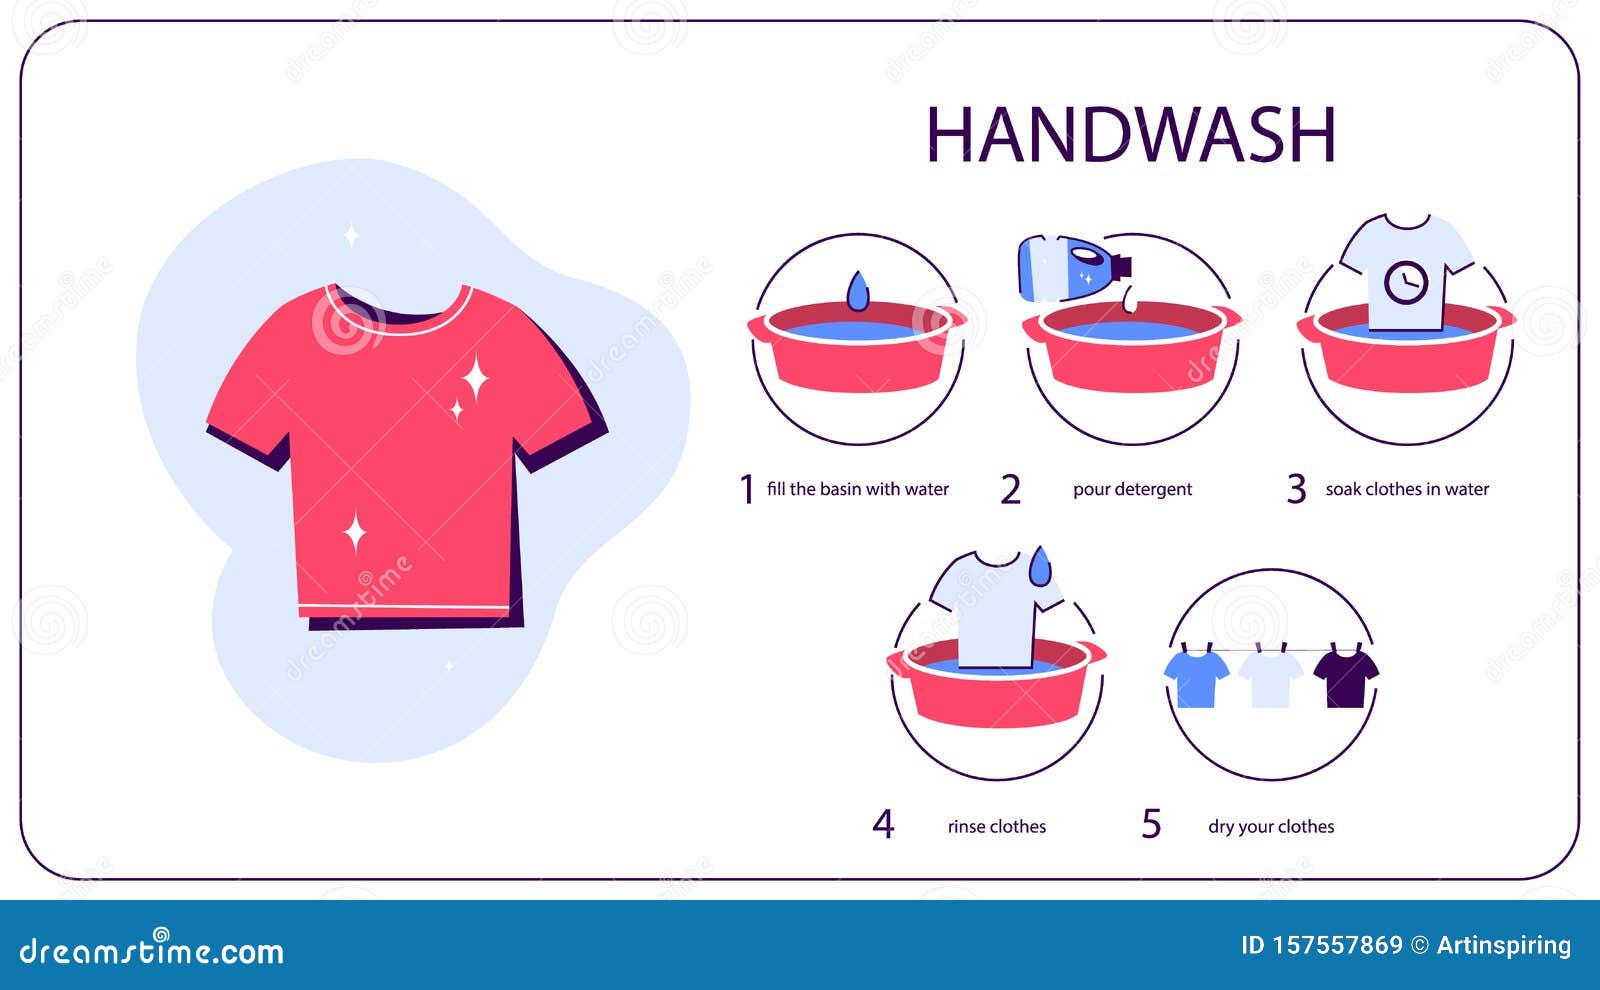 https://thumbs.dreamstime.com/z/how-to-wash-clothes-hand-instruction-housewife-how-to-wash-clothes-hand-instruction-housewife-using-powder-157557869.jpg